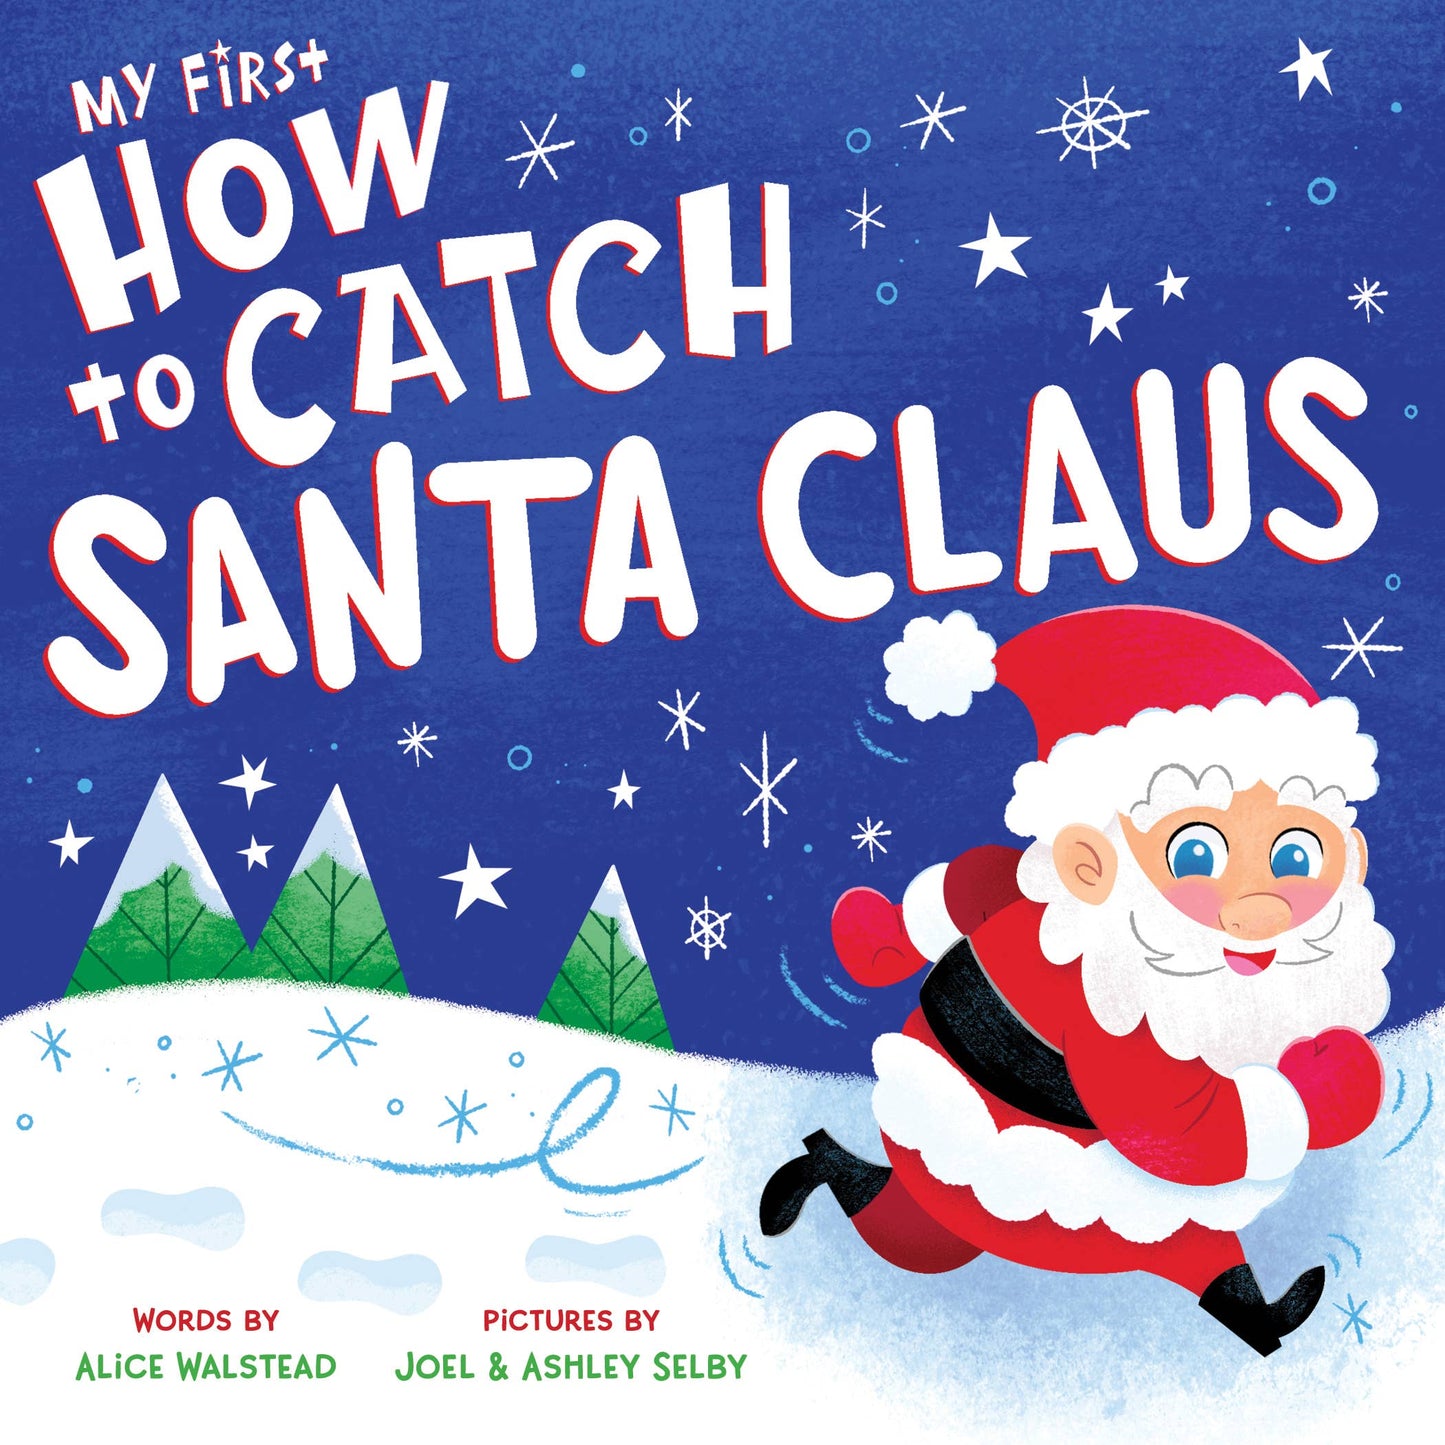 My First How To Catch Santa Claus